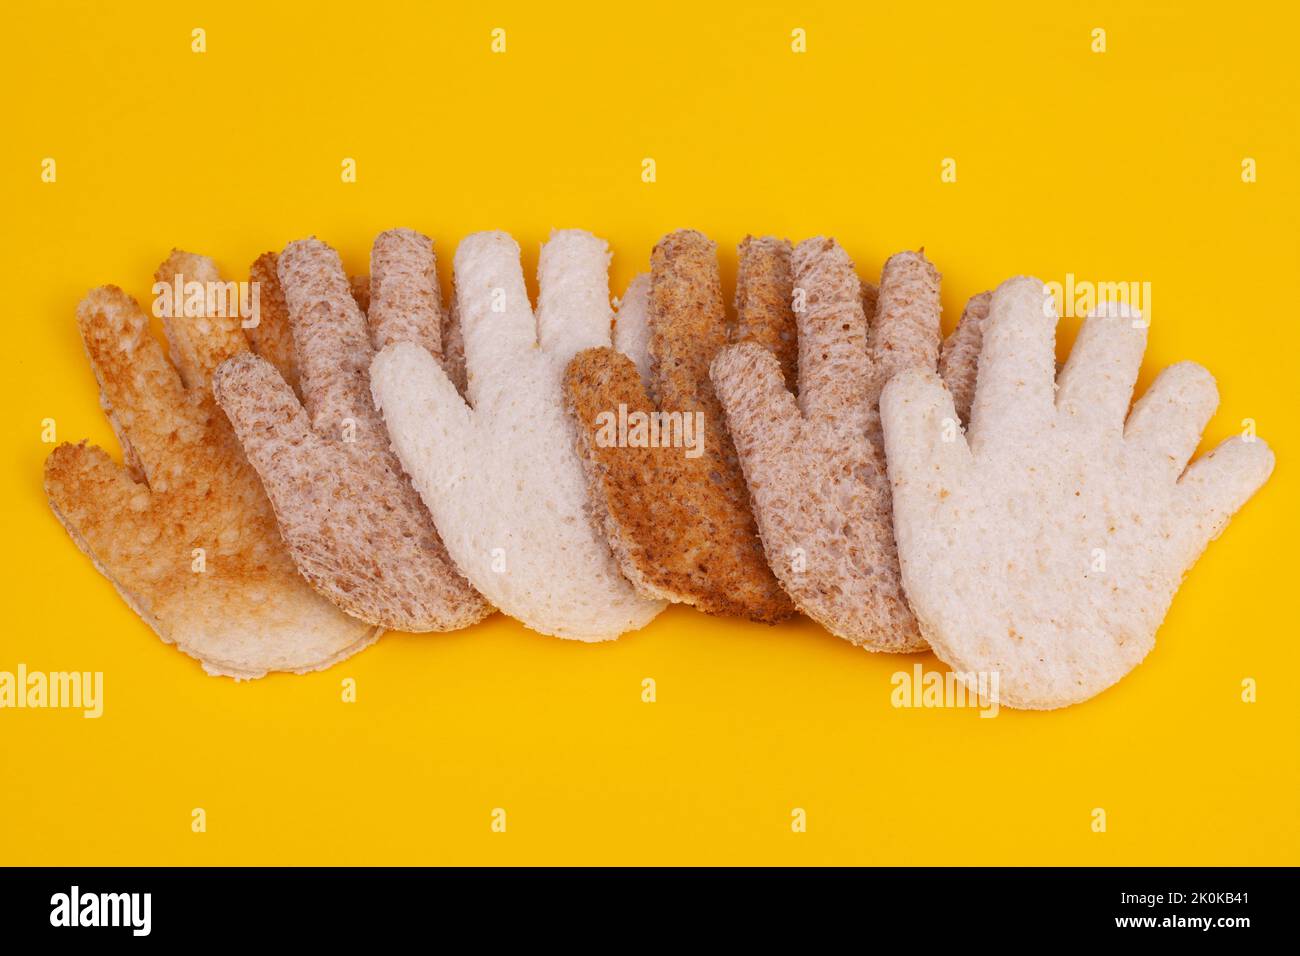 Hands made from toasted sliced bread. Multicultural hands concept together on a yellow background Stock Photo